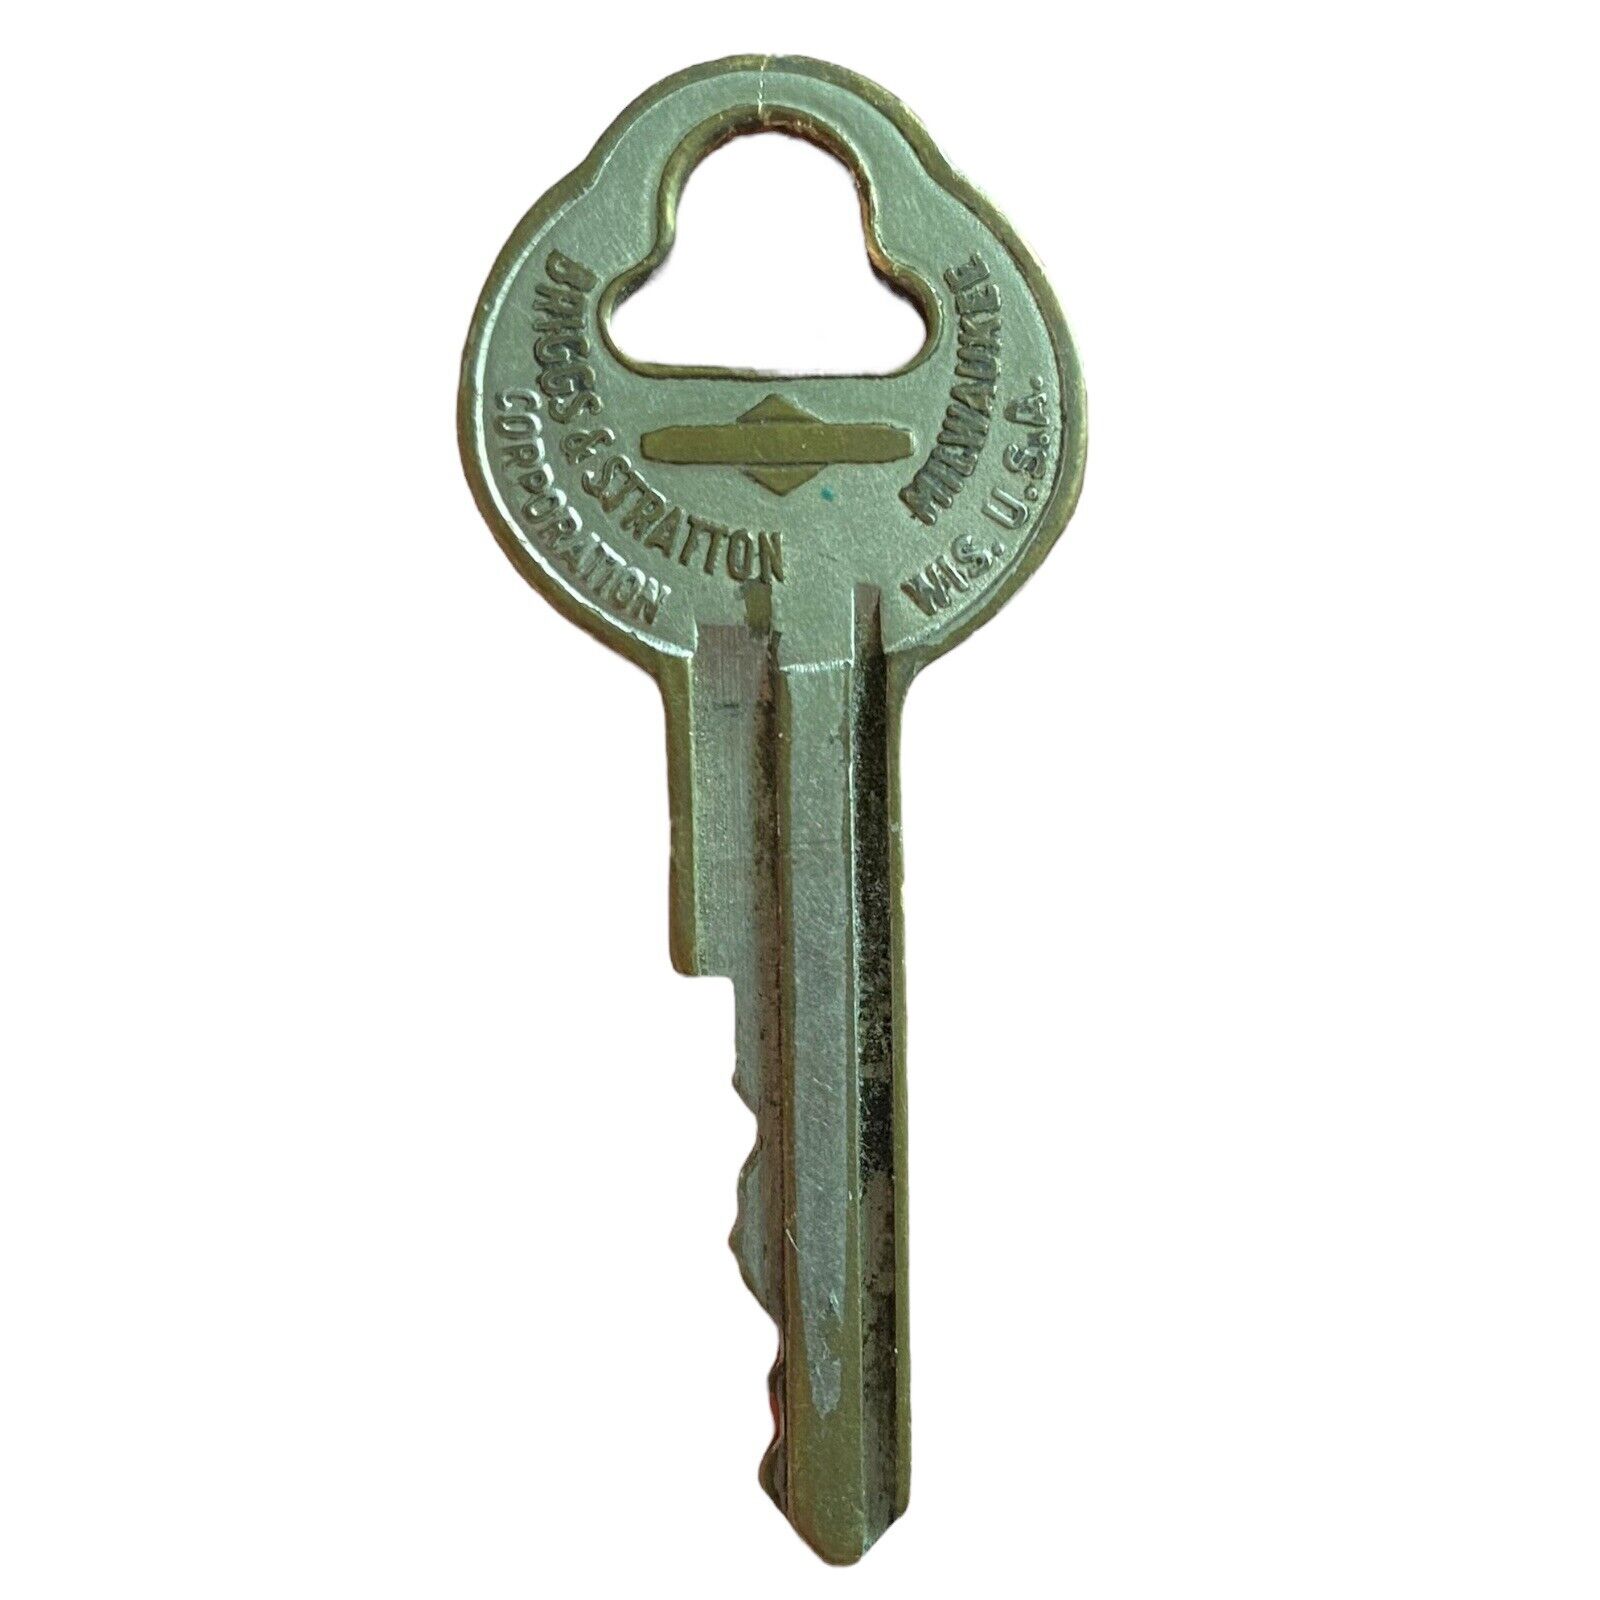 Vintage GM Briggs & Stratton Brass Key  Your Key to Greater Value